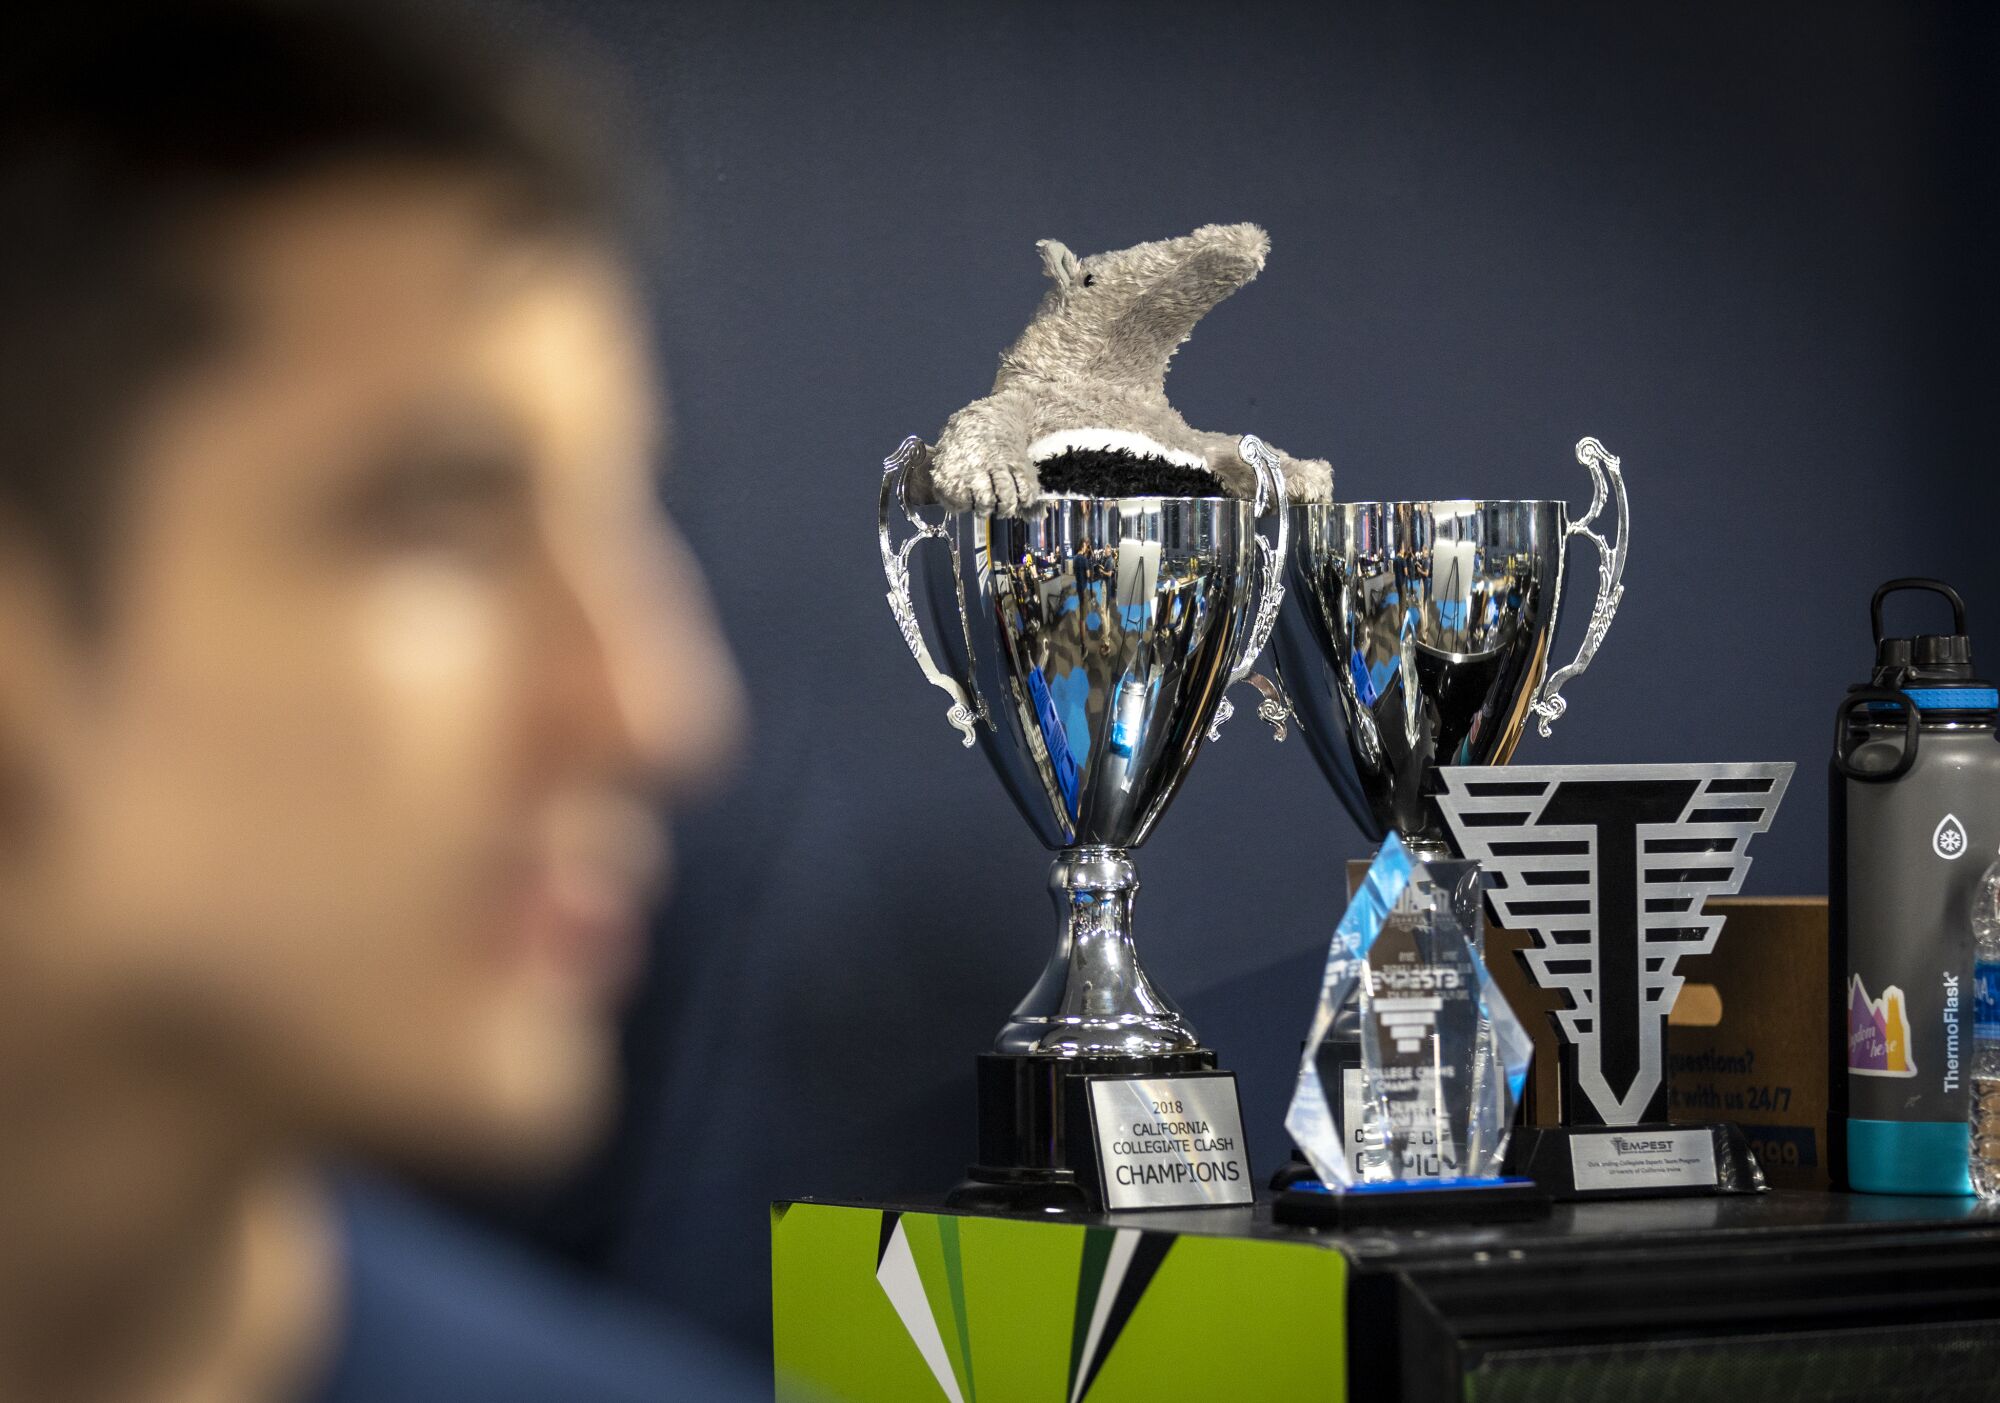 A view of UCI esports gaming trophies with Phillip Rodriguez.